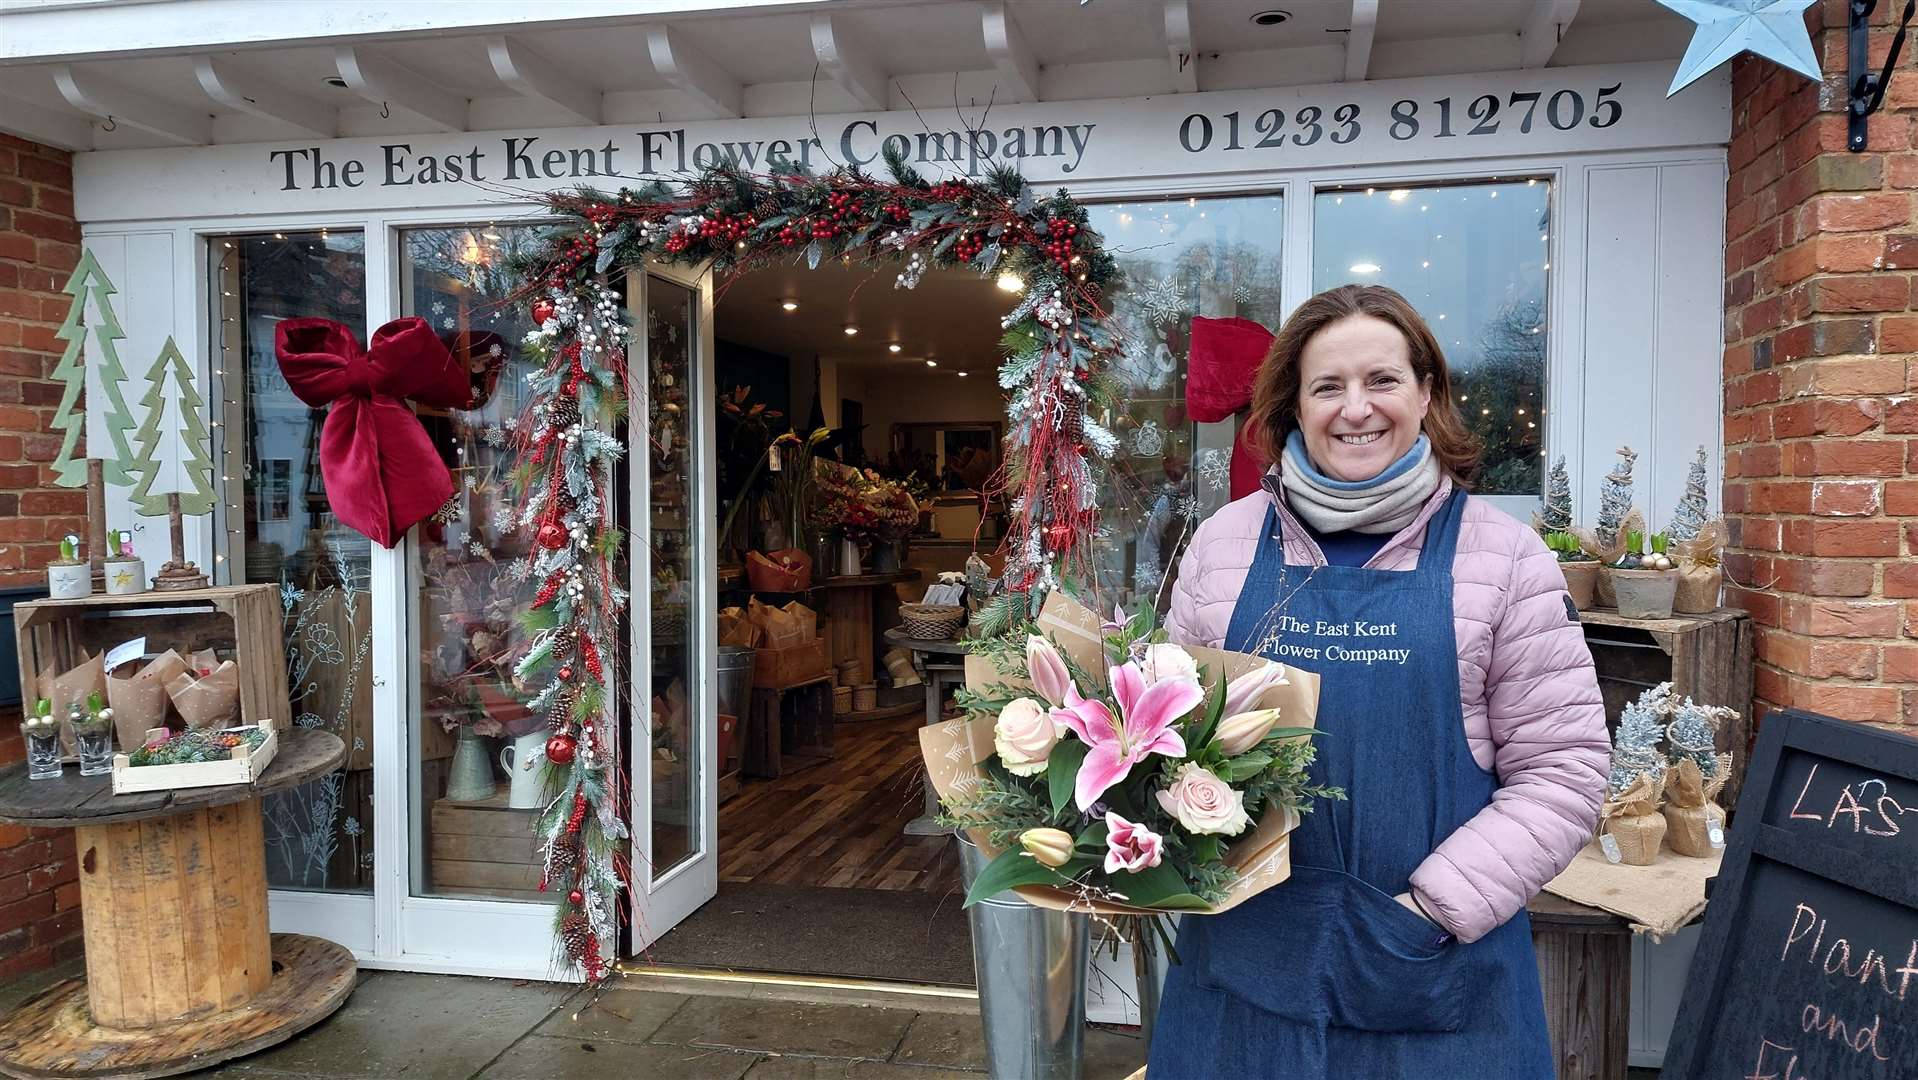 Louise Courtenay, owner of East Kent Flower Company in Wye